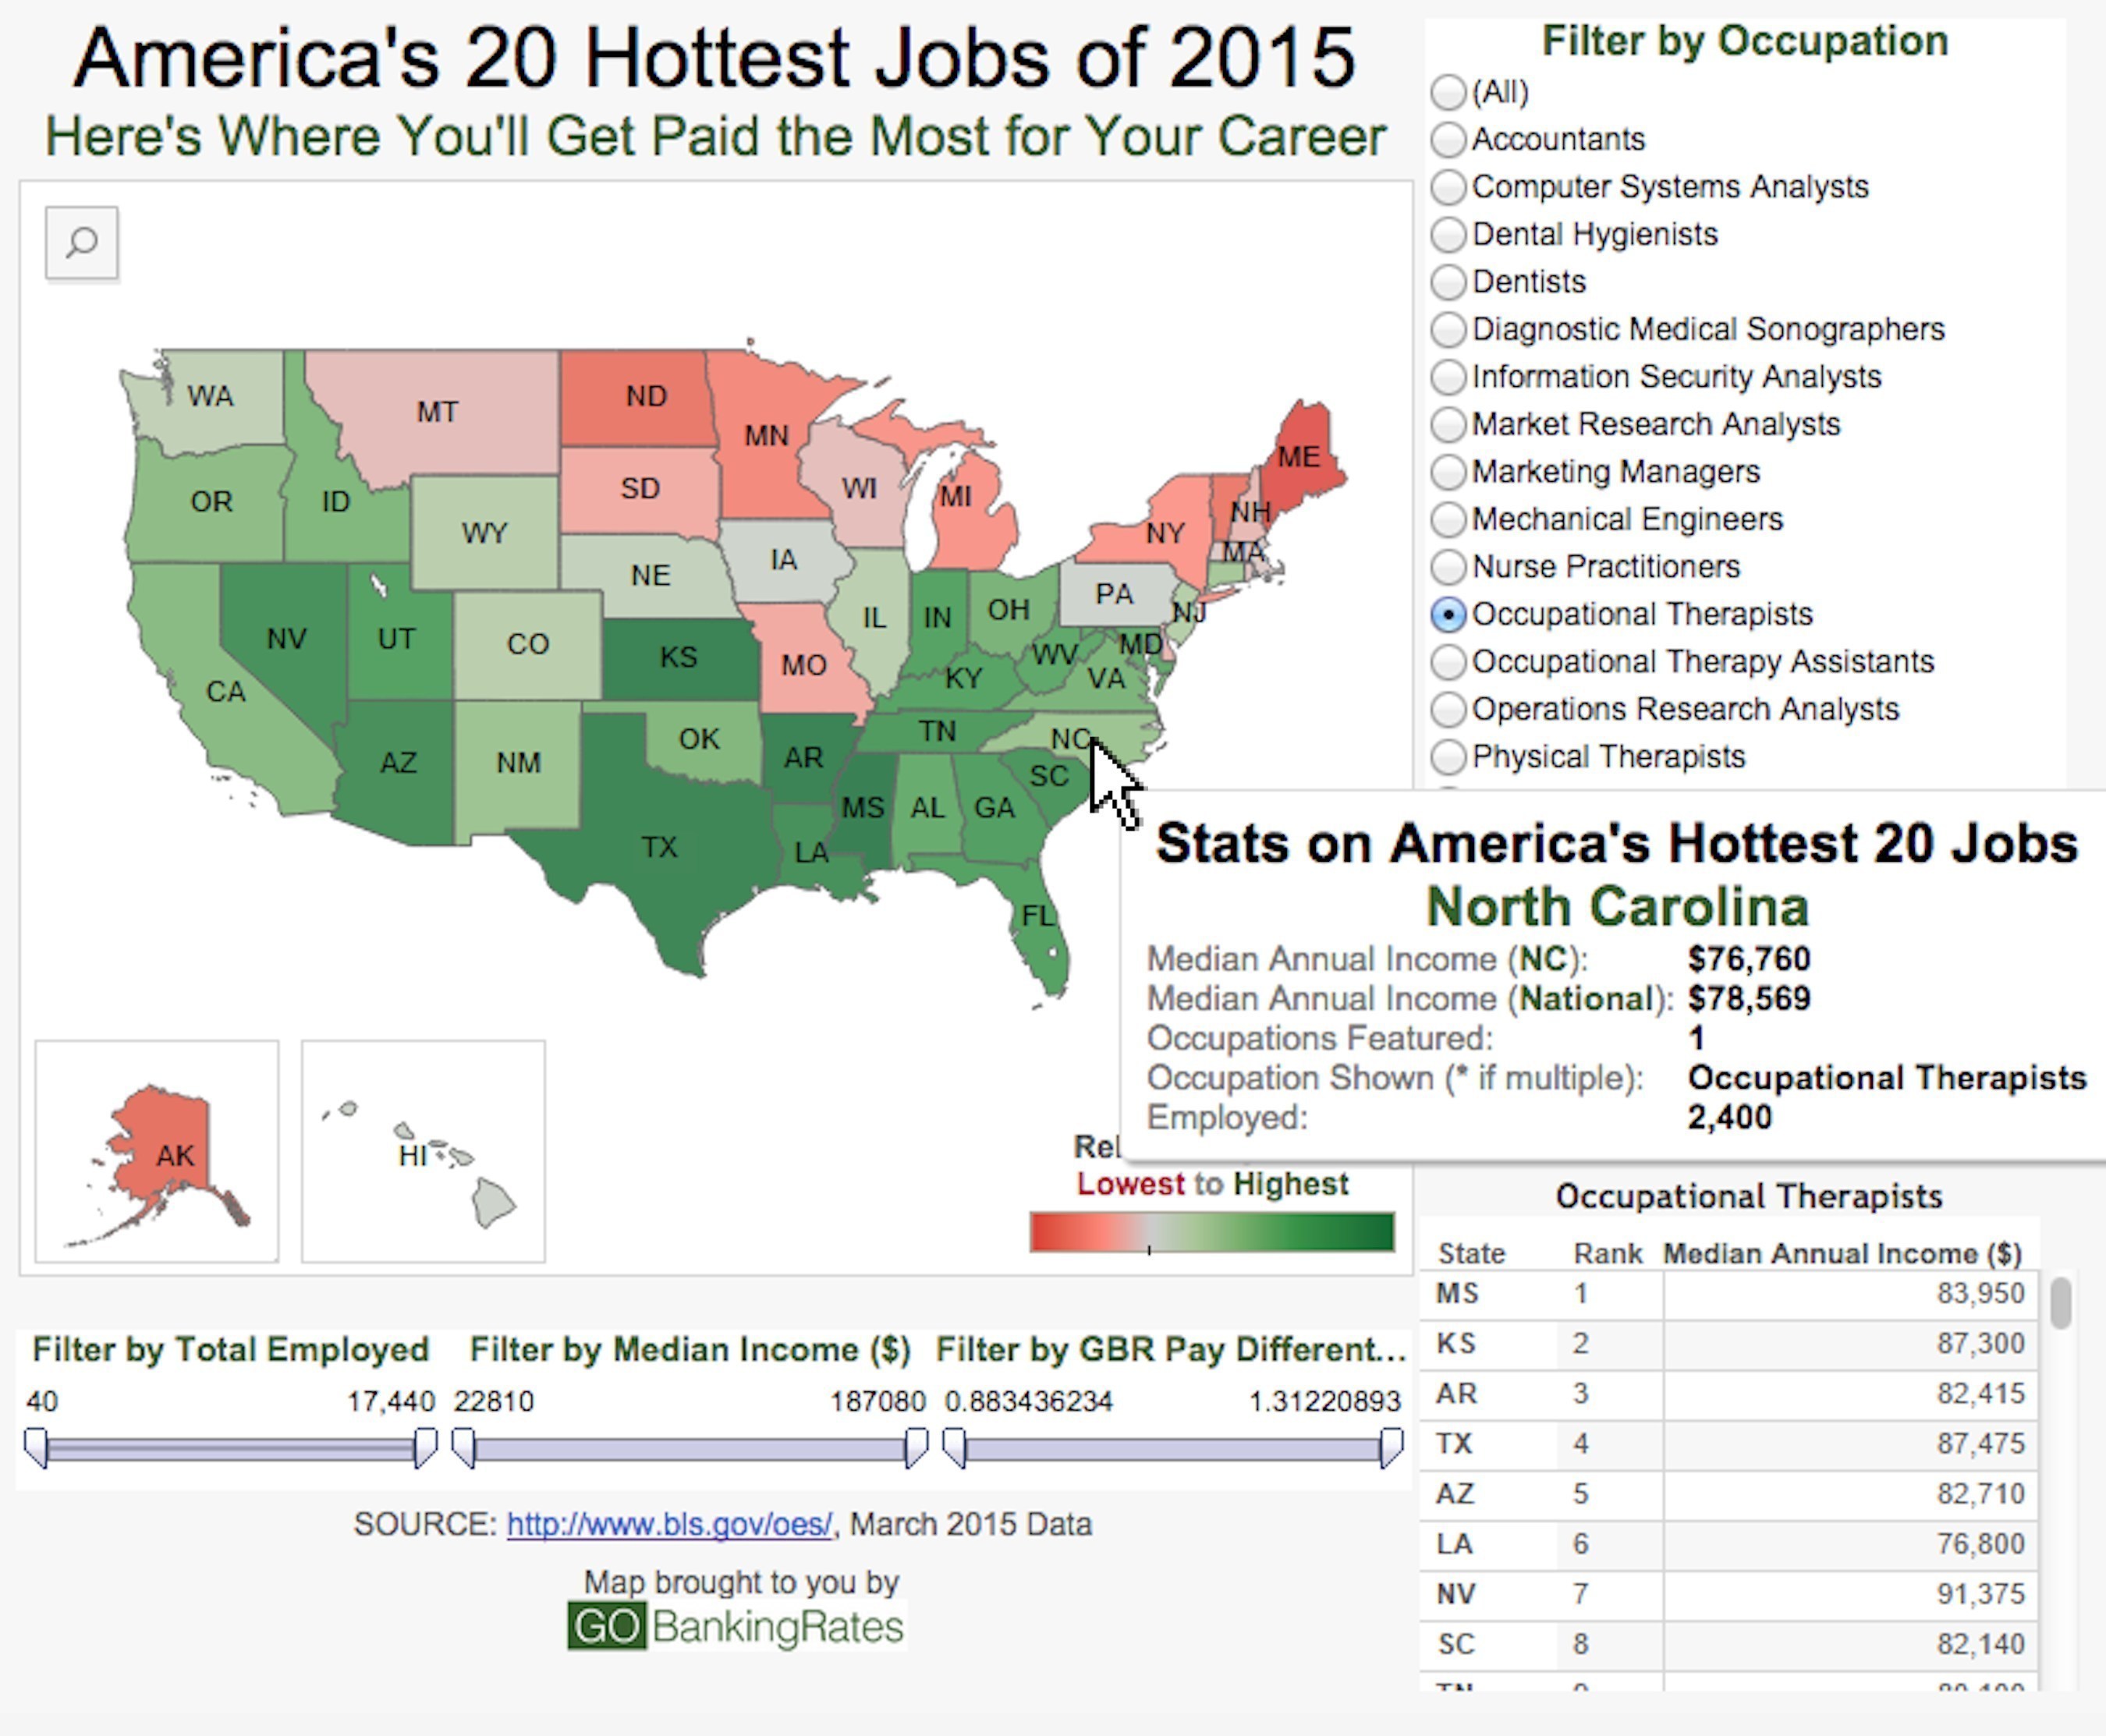 Interactive map shows what you'd earn in your job based on where you live: http://bit.ly/1OIHp41